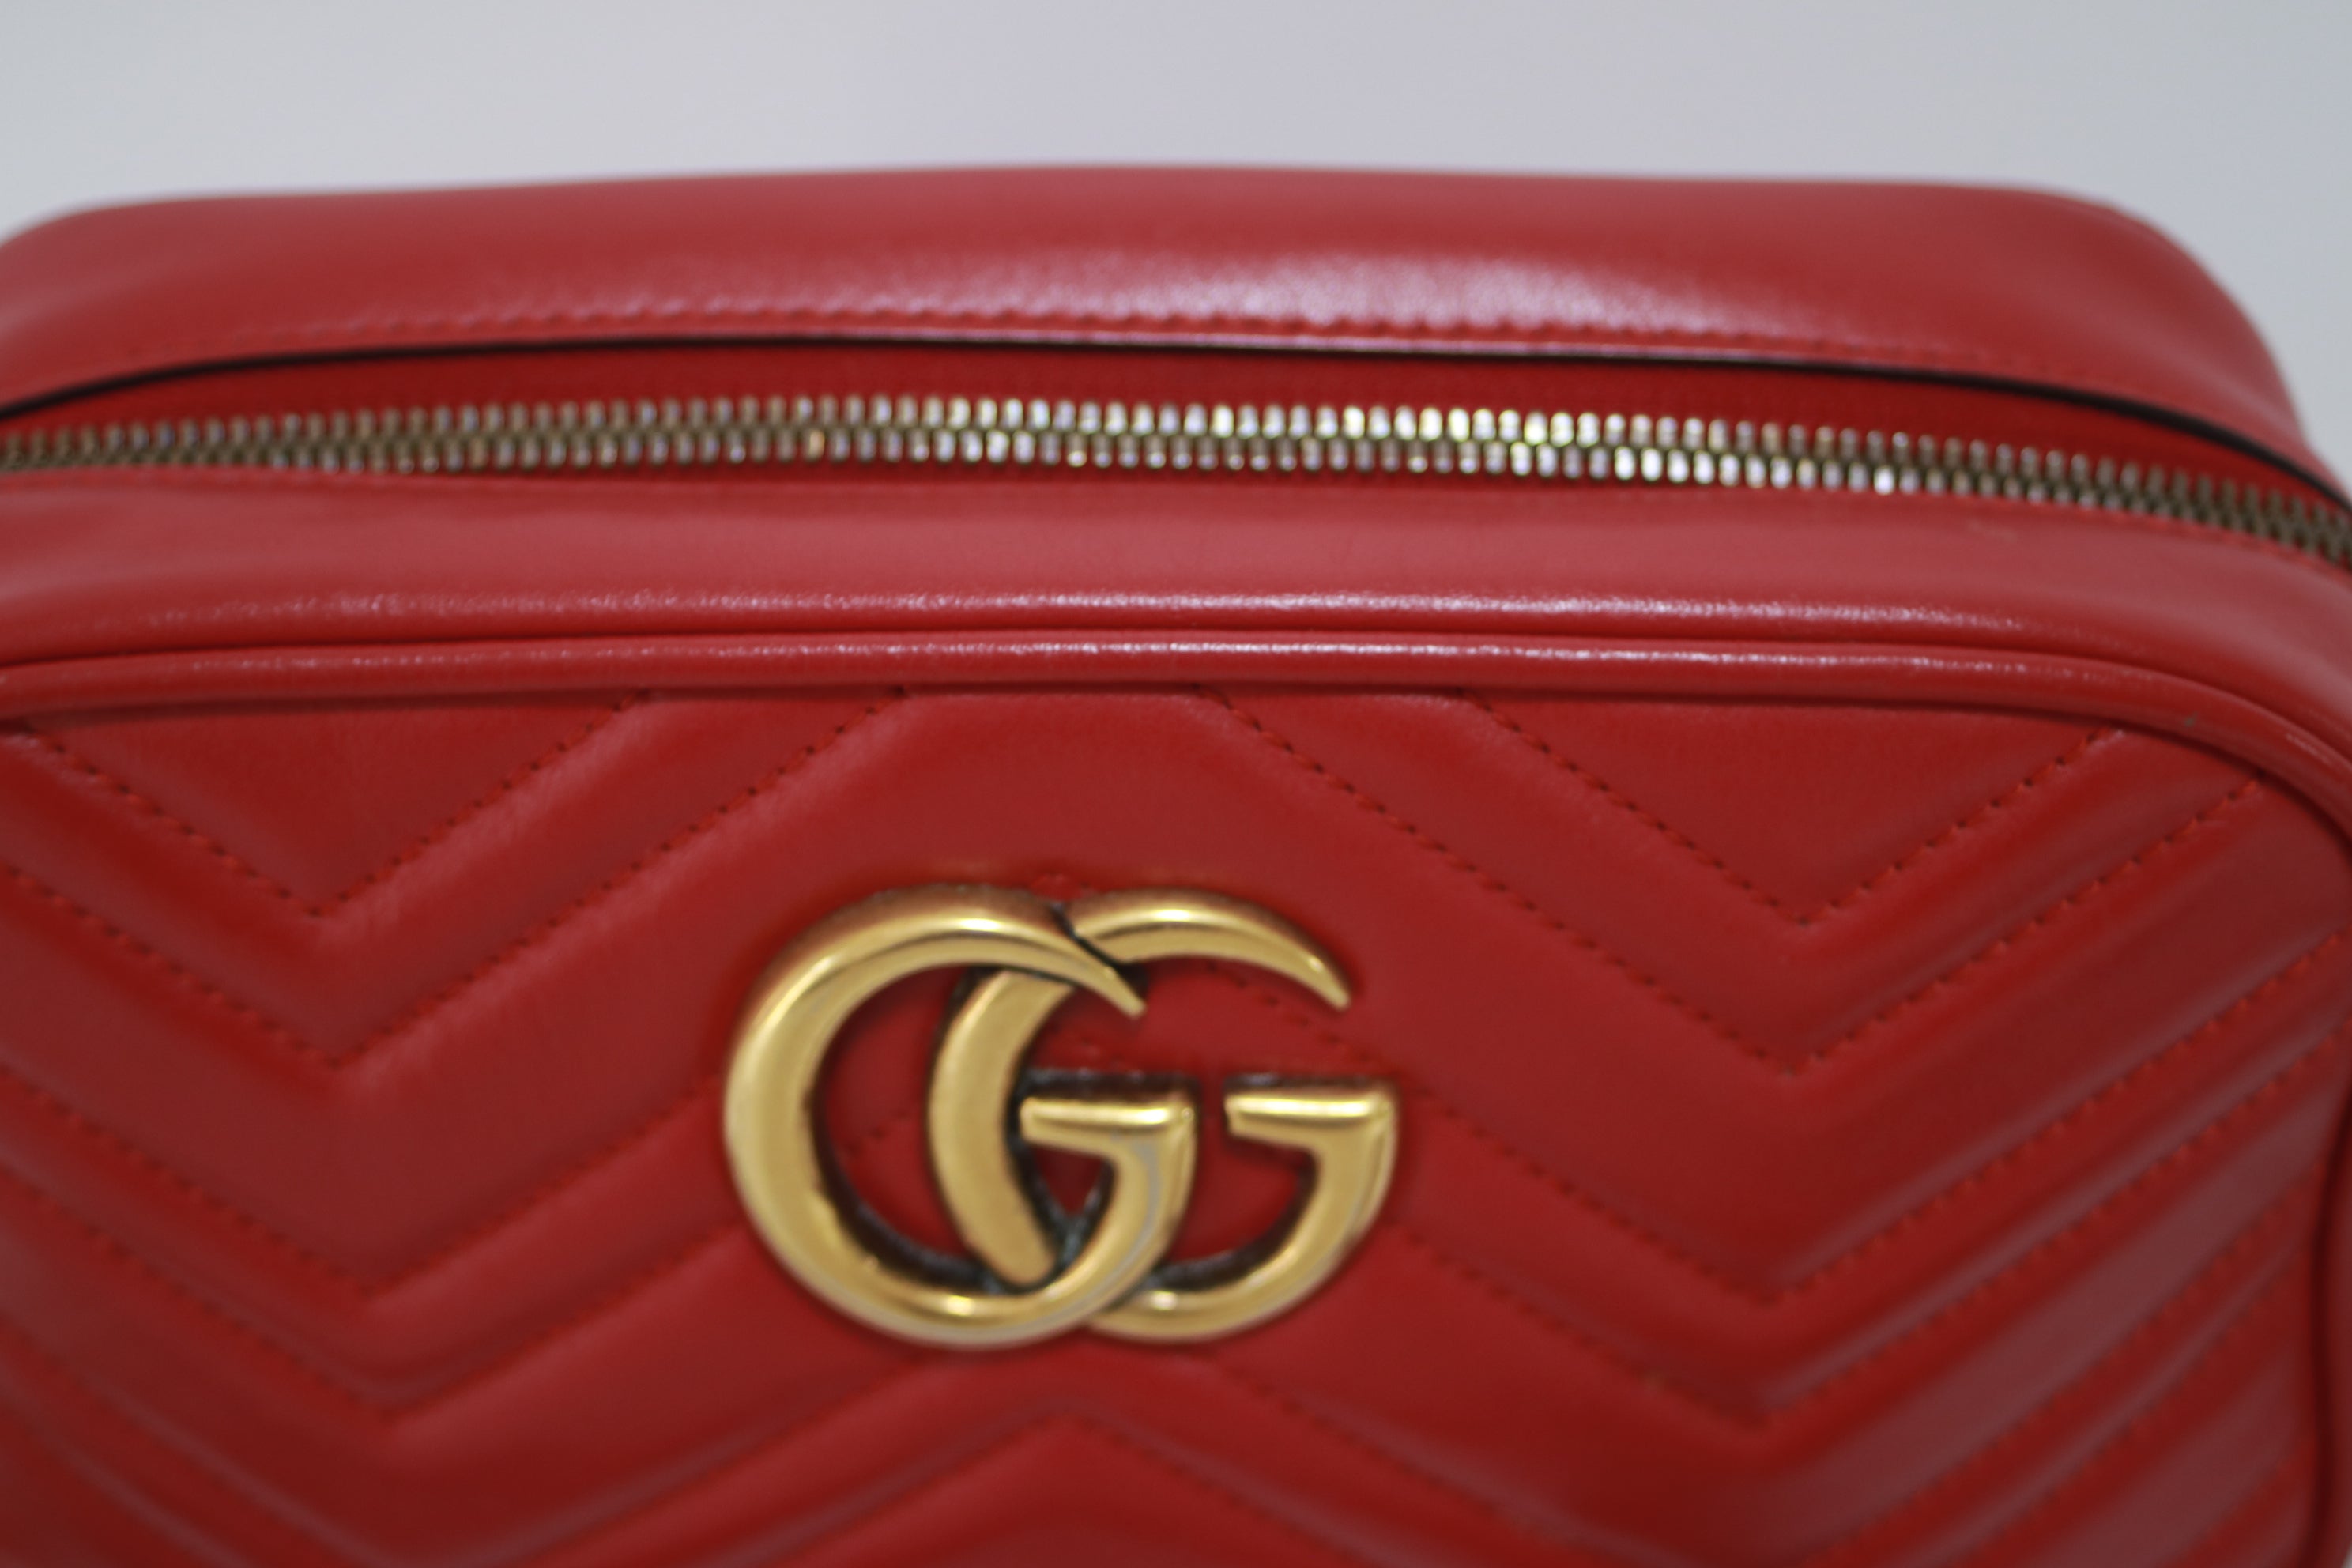 Gucci Marmont Shoulder Bag Red Used (7553)